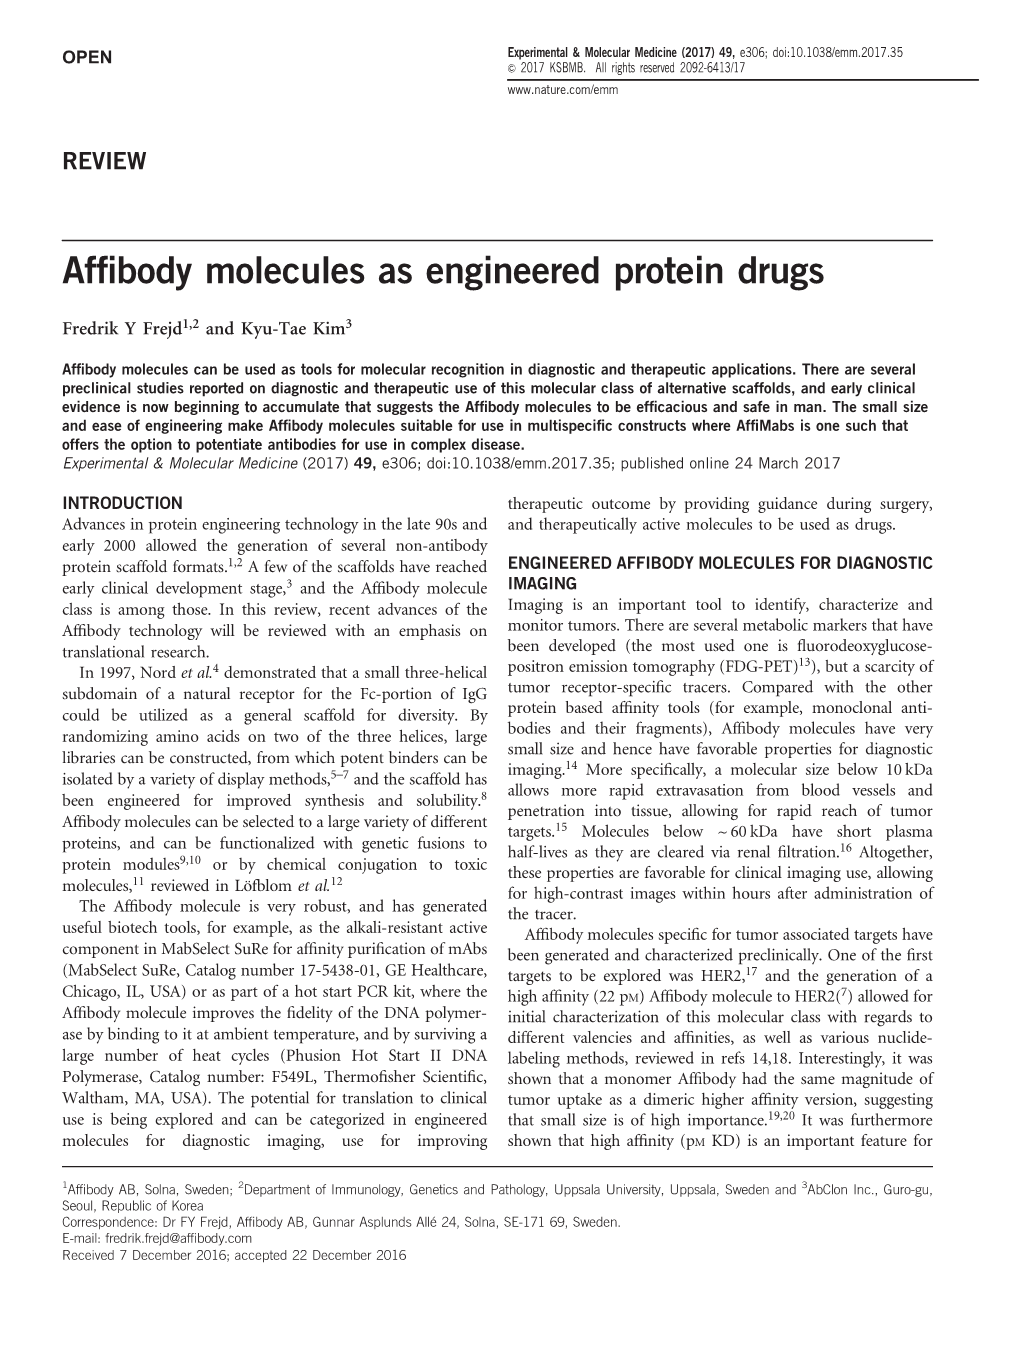 Affibody Molecules As Engineered Protein Drugs